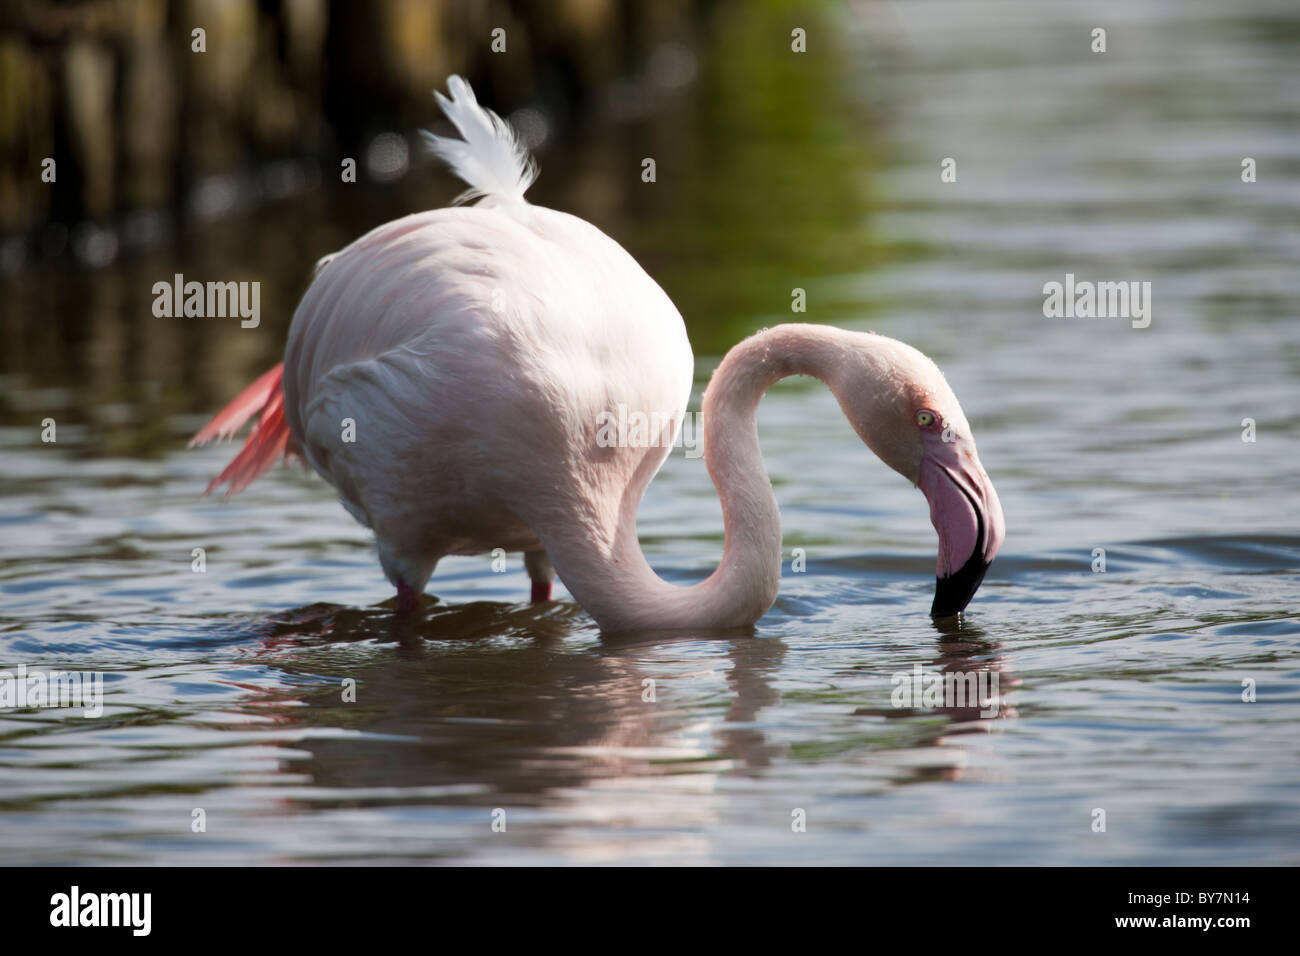 A Lesser Flamingo with ruffled feathers, wading in the water searching for food. Stock Photo